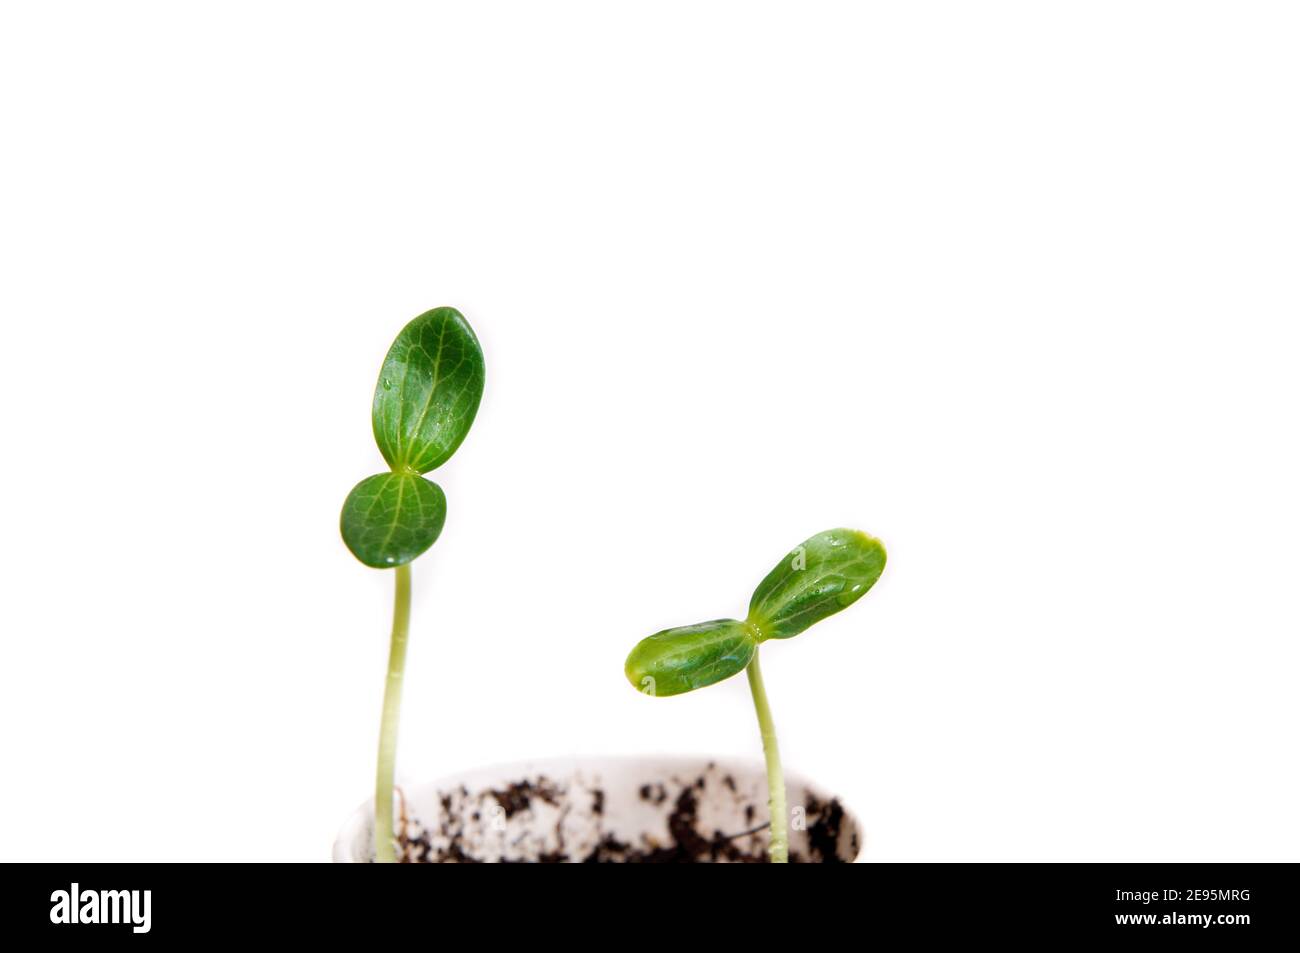 green baby plant. Business growth concept, personality. Stock Photo